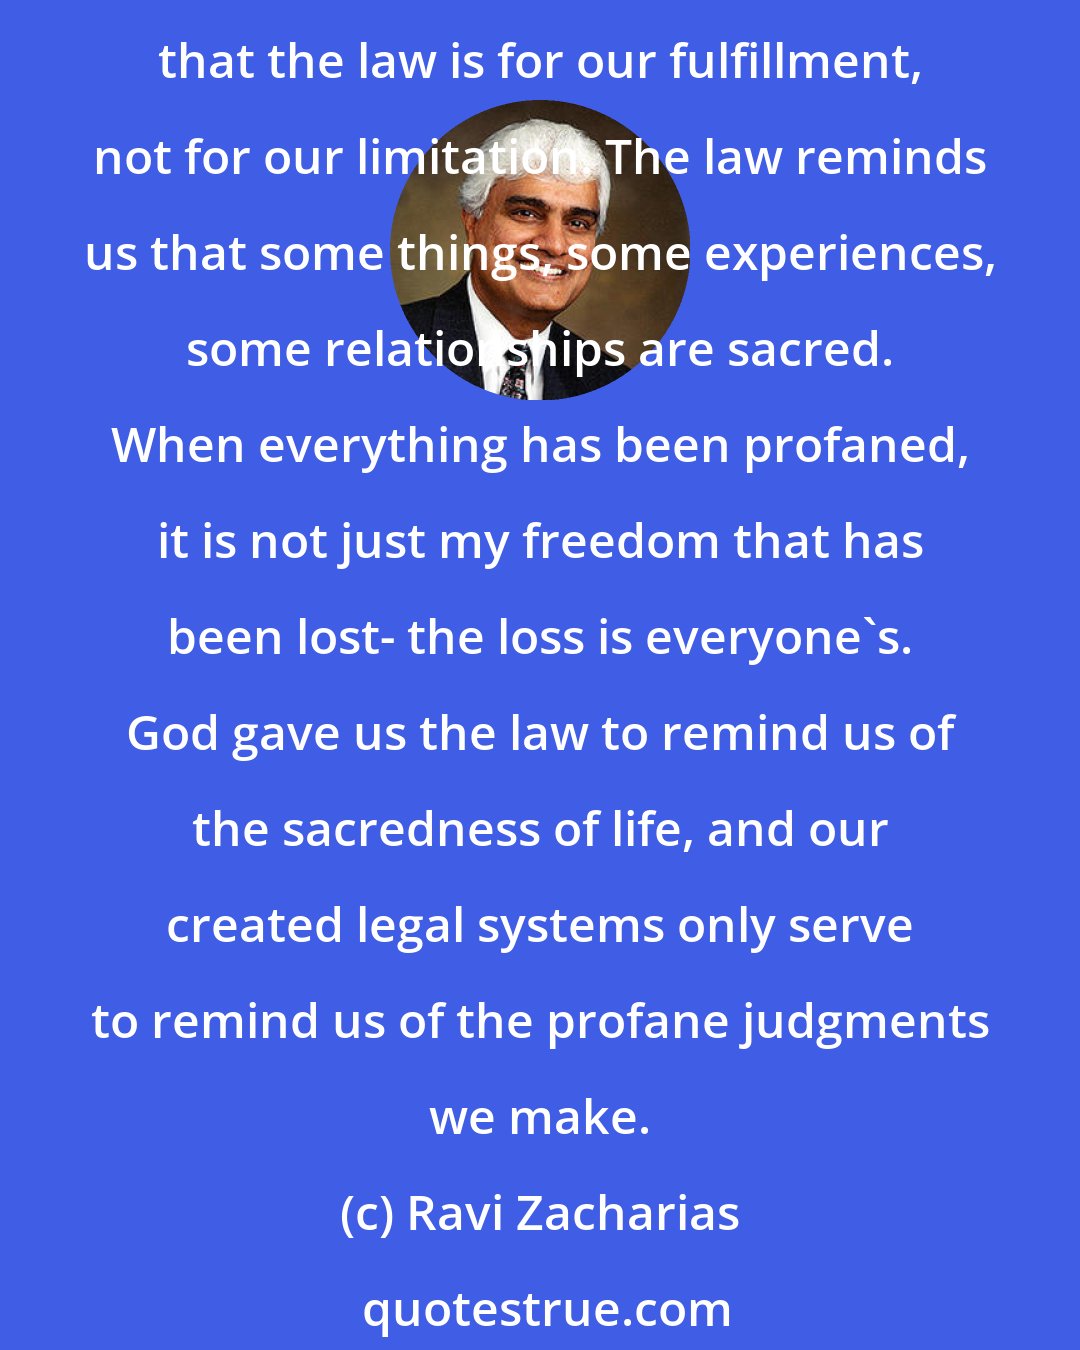 Ravi Zacharias: None of us like the concept of law because none of us like the restraints it puts on us. But when we understand that God has given us his law to aid us in guarding our souls, we see that the law is for our fulfillment, not for our limitation. The law reminds us that some things, some experiences, some relationships are sacred. When everything has been profaned, it is not just my freedom that has been lost- the loss is everyone's. God gave us the law to remind us of the sacredness of life, and our created legal systems only serve to remind us of the profane judgments we make.